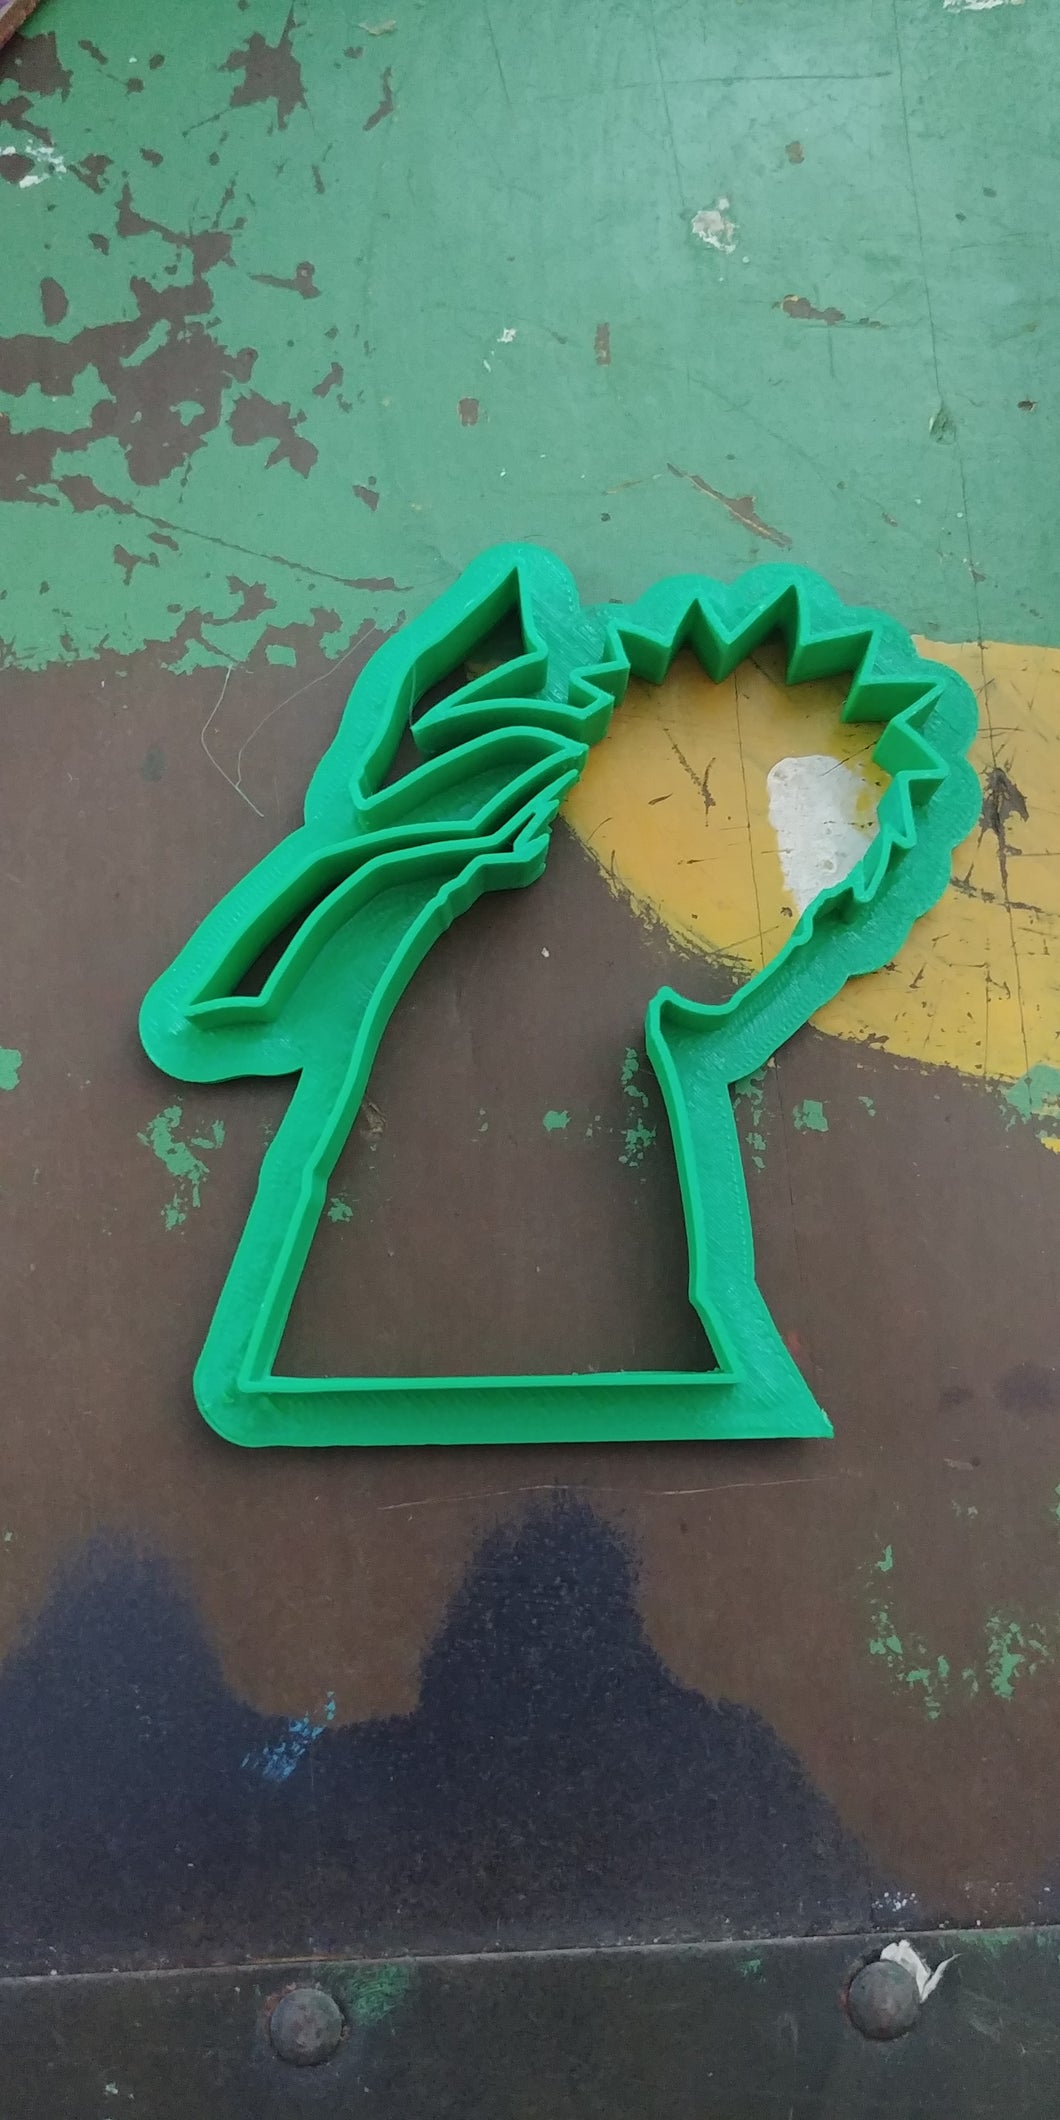 3D Printed Cookie Cutter Inspired by Naruto